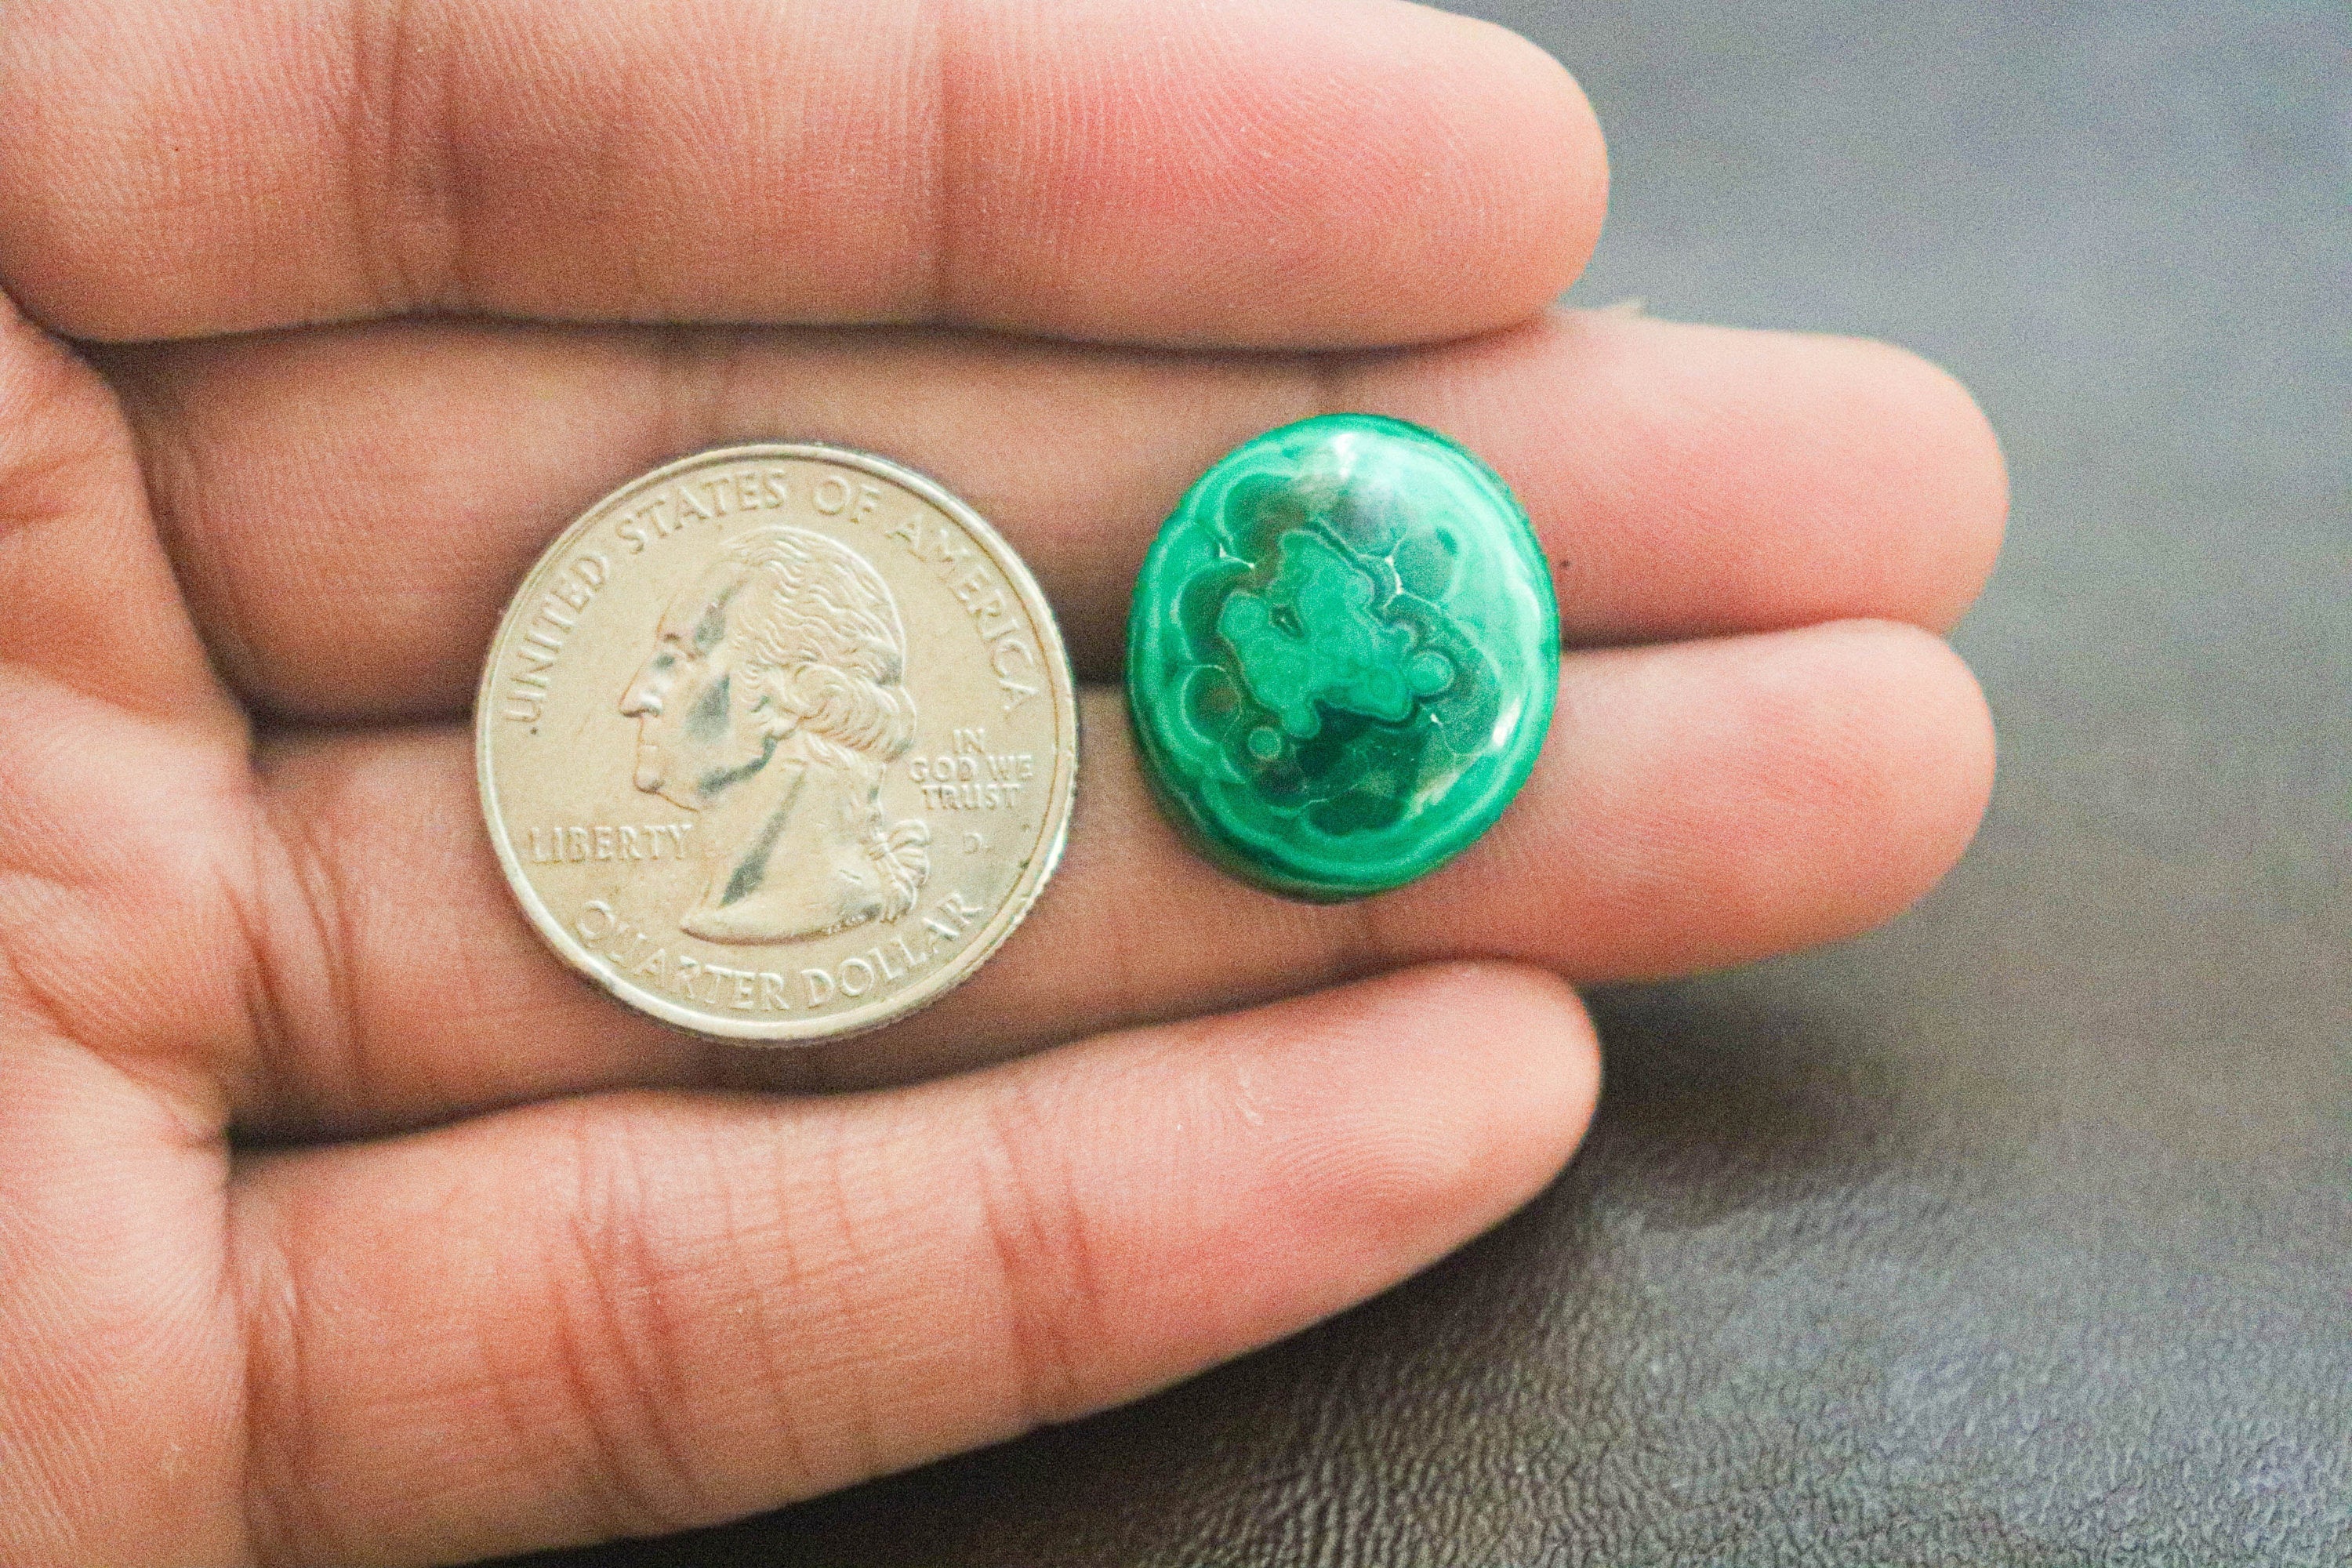 Highly Polished Malachite Oval Cabochon | 18x20mm | Excellent Quality For Jewelry Making / Wire Wrapping | Natural Malachite Gemstone Beadsforyourjewelry